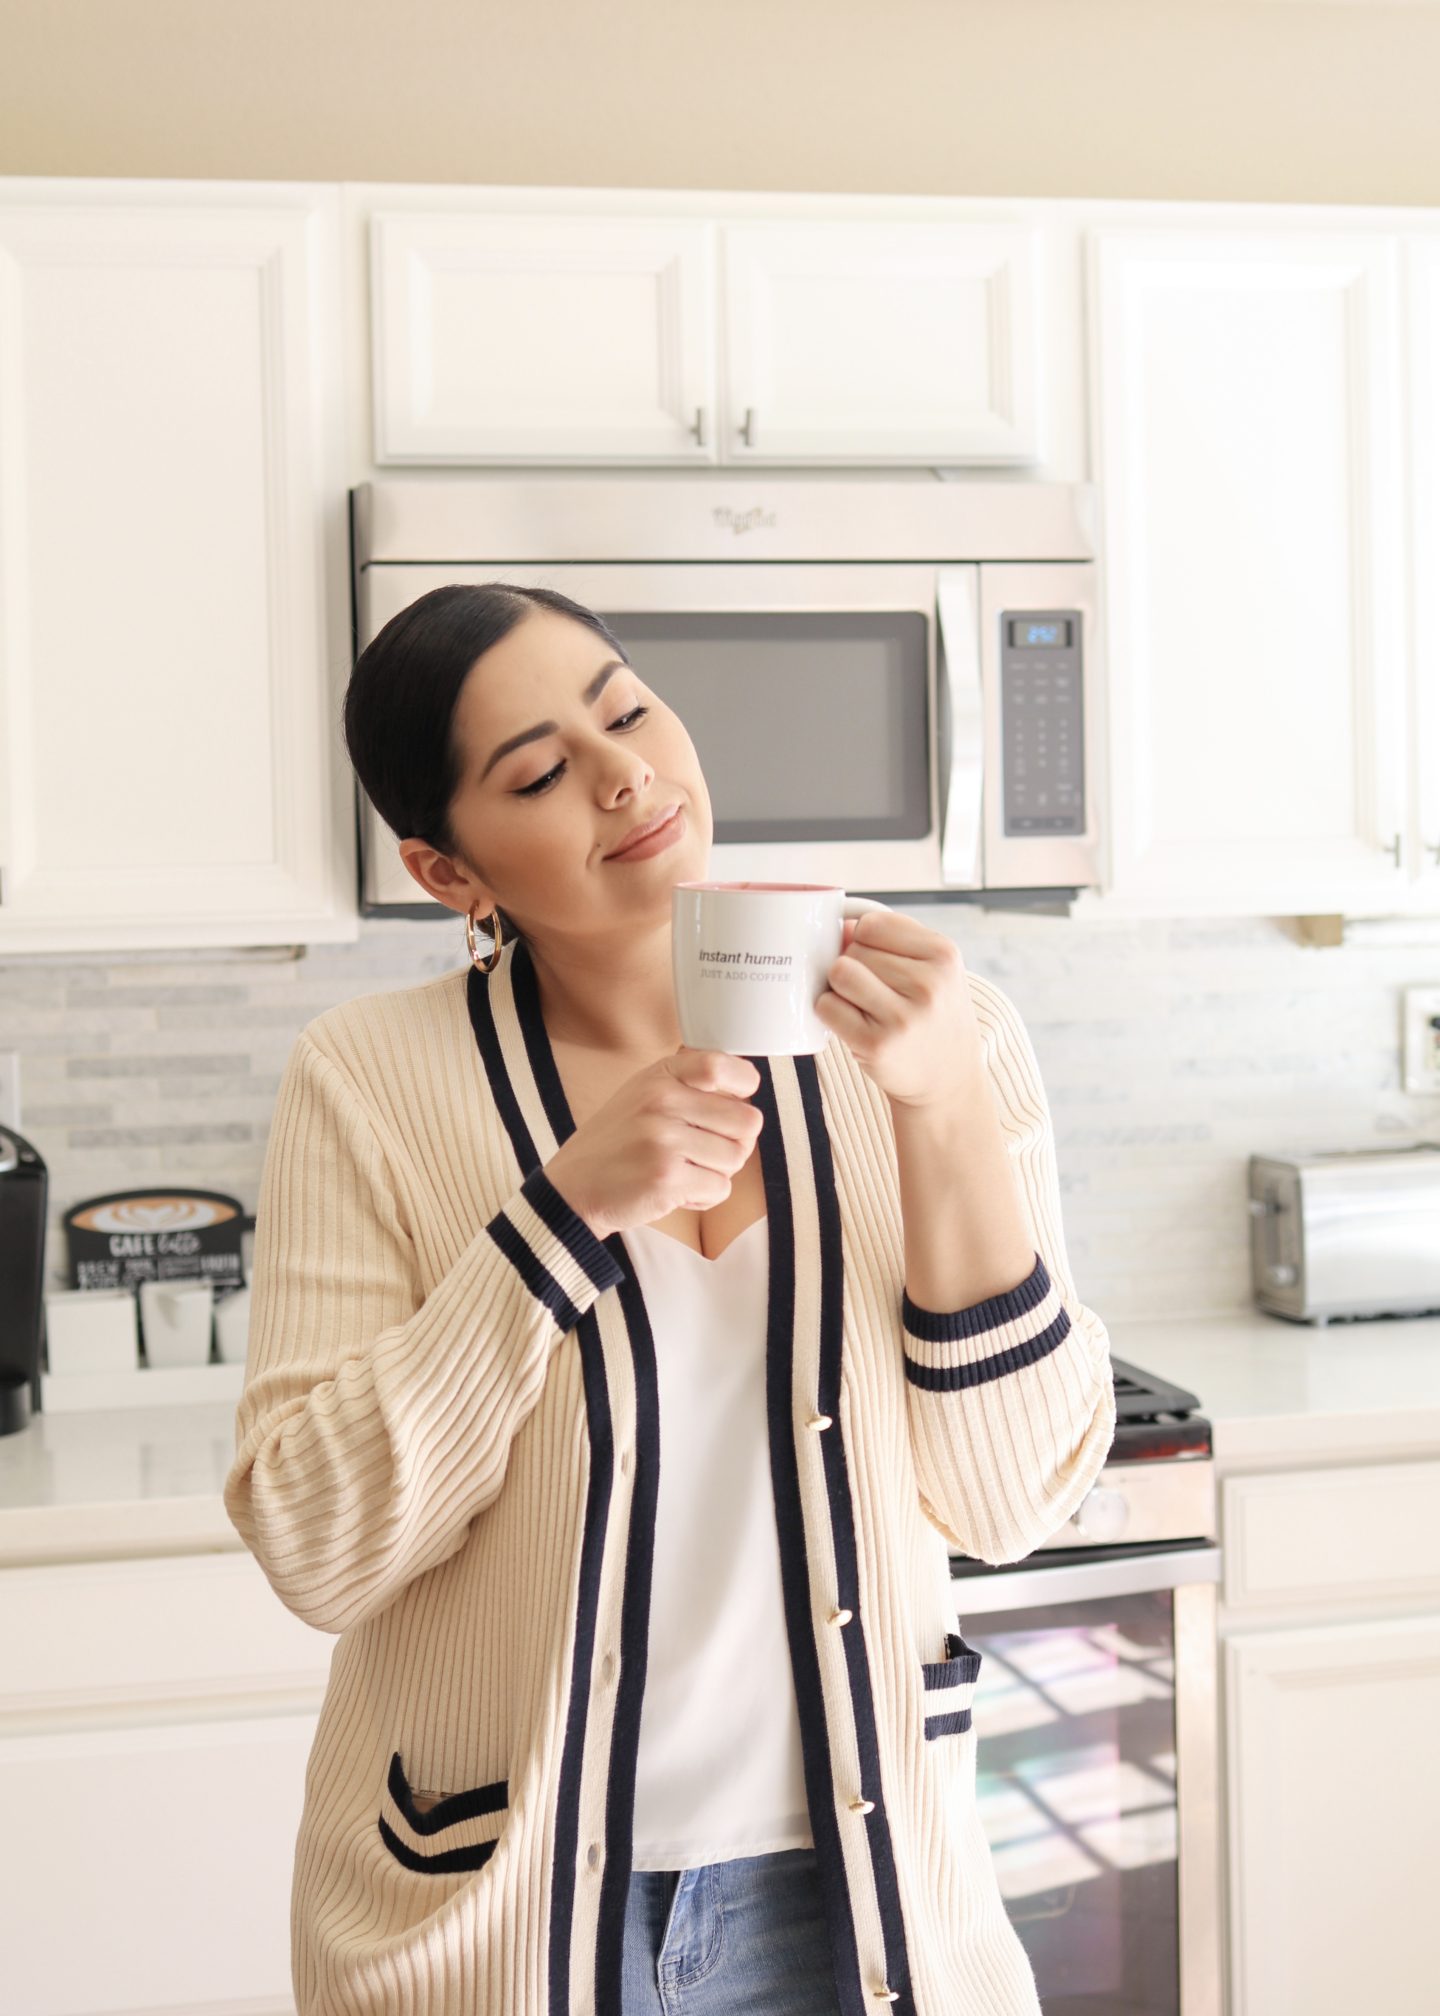 what to wear at home, affordable chic look at home, coffee date at home